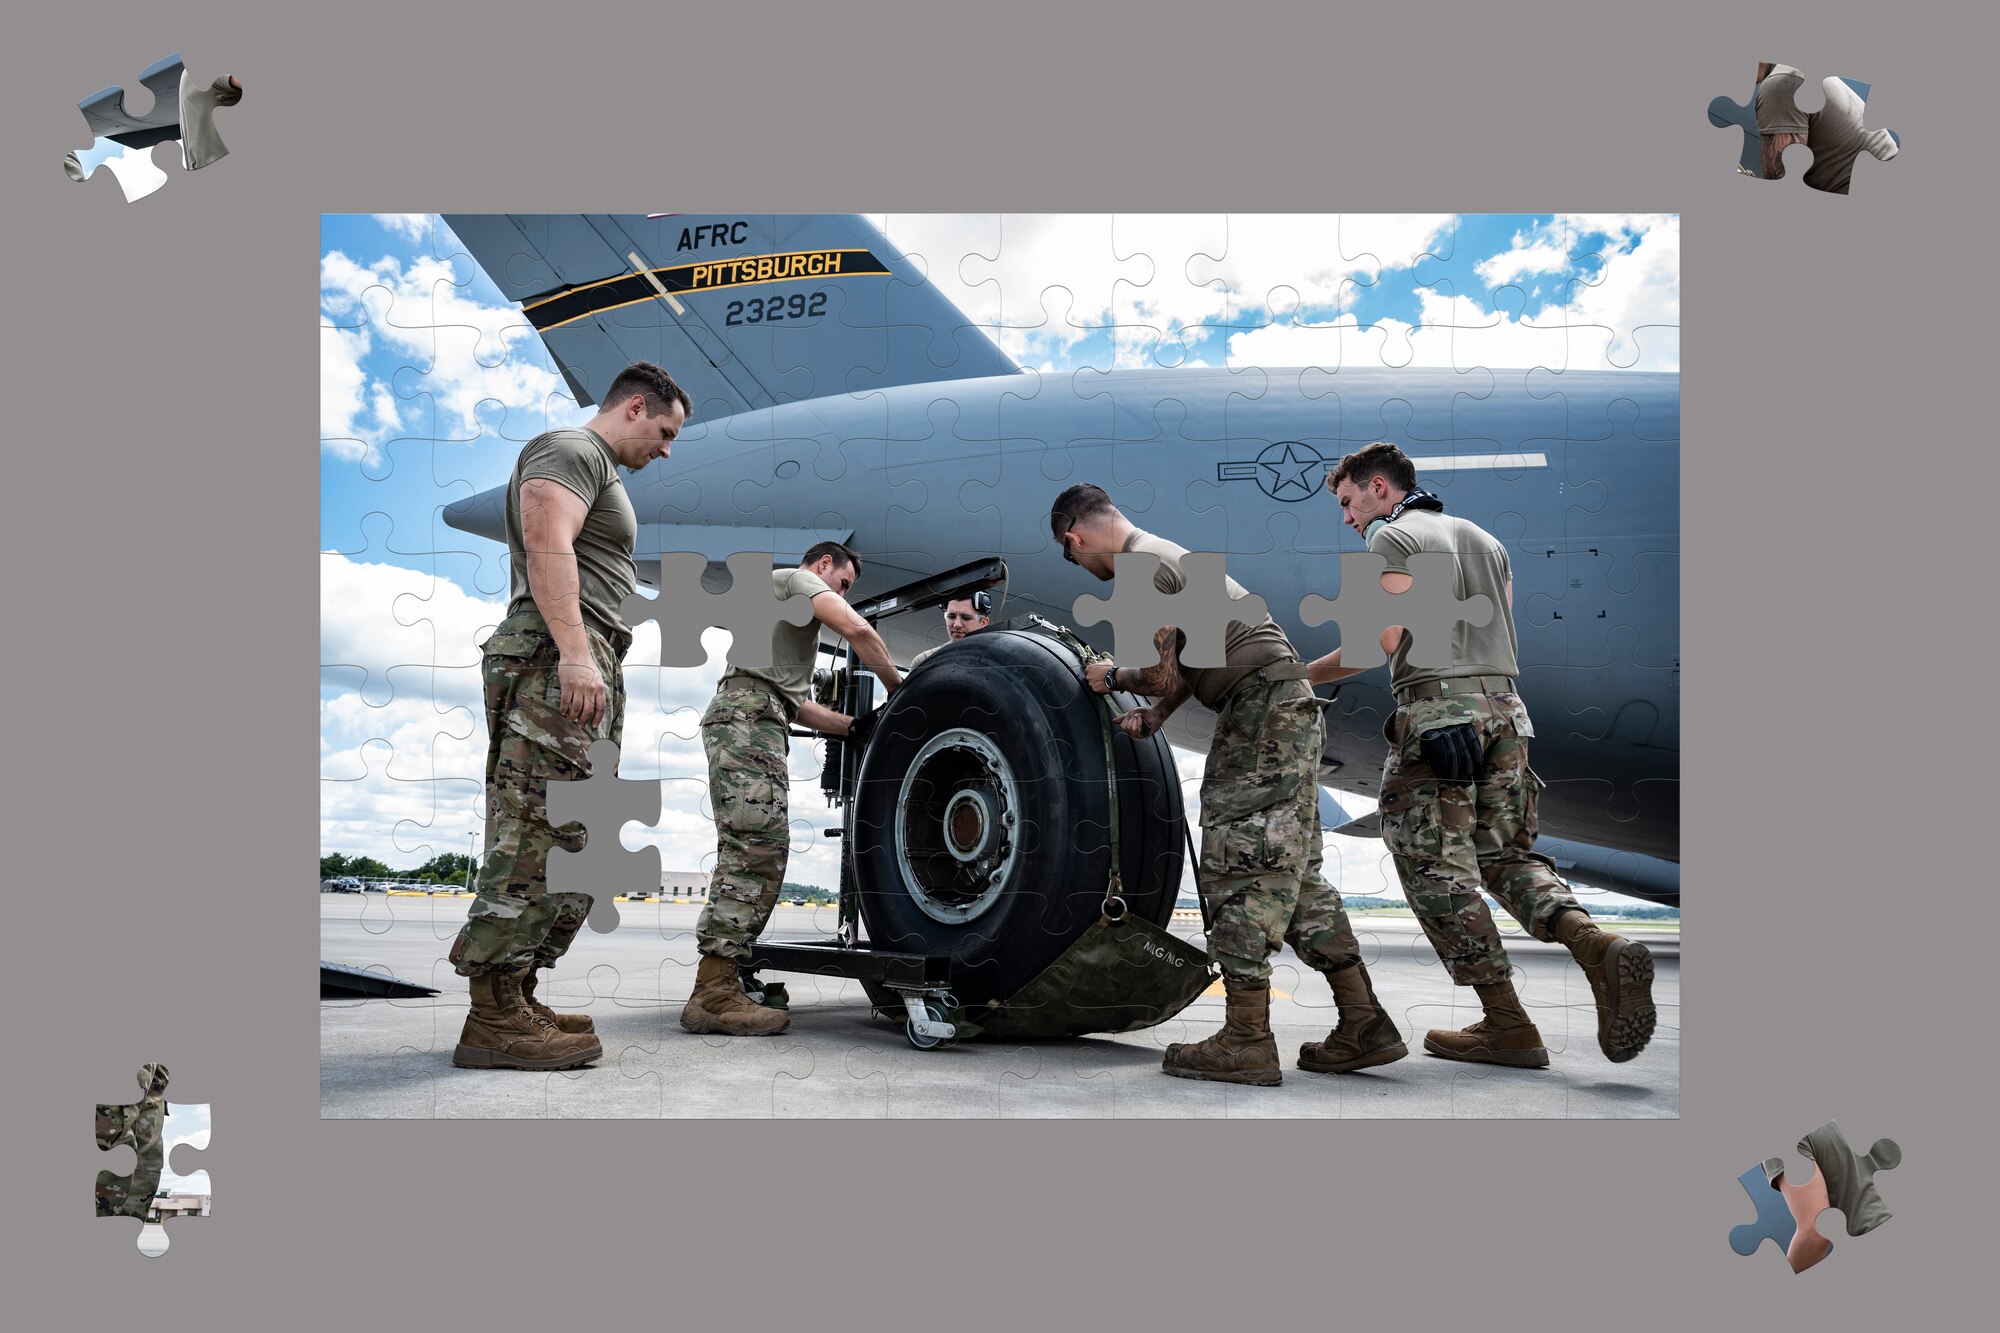 Airmen assigned to the 911th Maintenance Group load a C-17 Globemaster III tire onto a harness during a tire change at the Pittsburgh International Airport Air Reserve Station, Pennsylvania, Aug. 2, 2021.